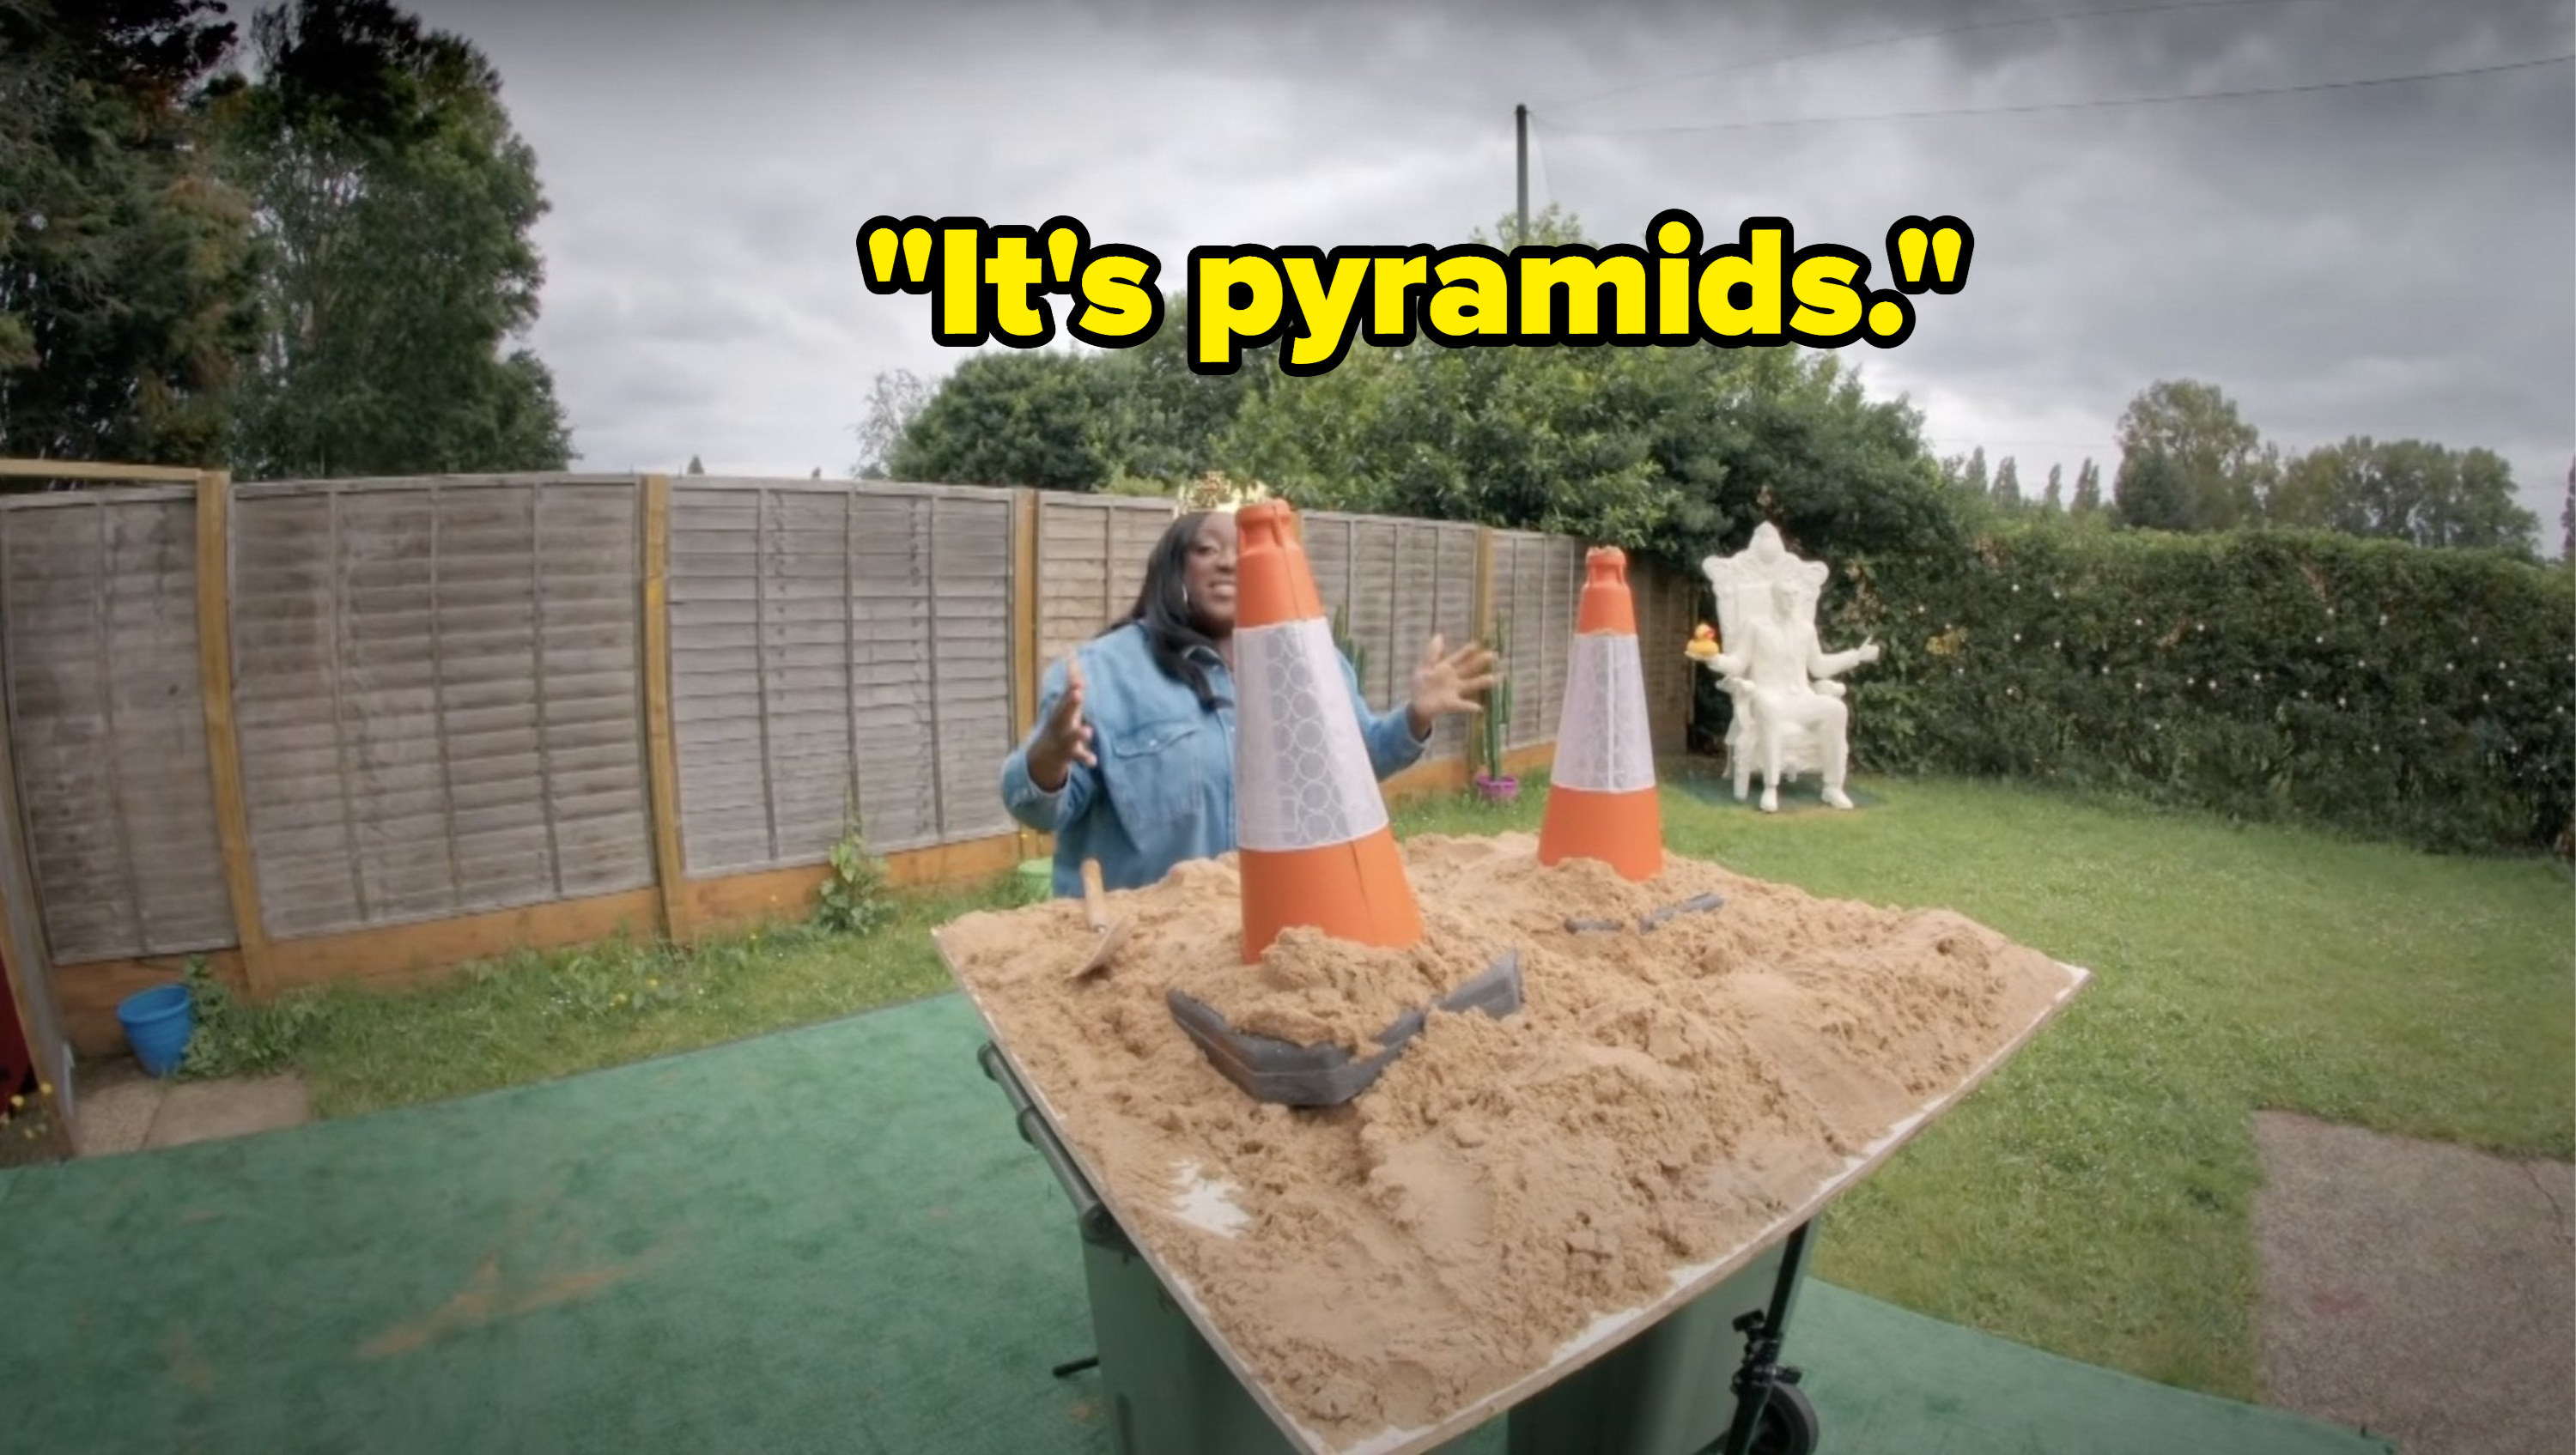 While standing in front of two traffic cones in sand, Judi Love says, Its pyramids